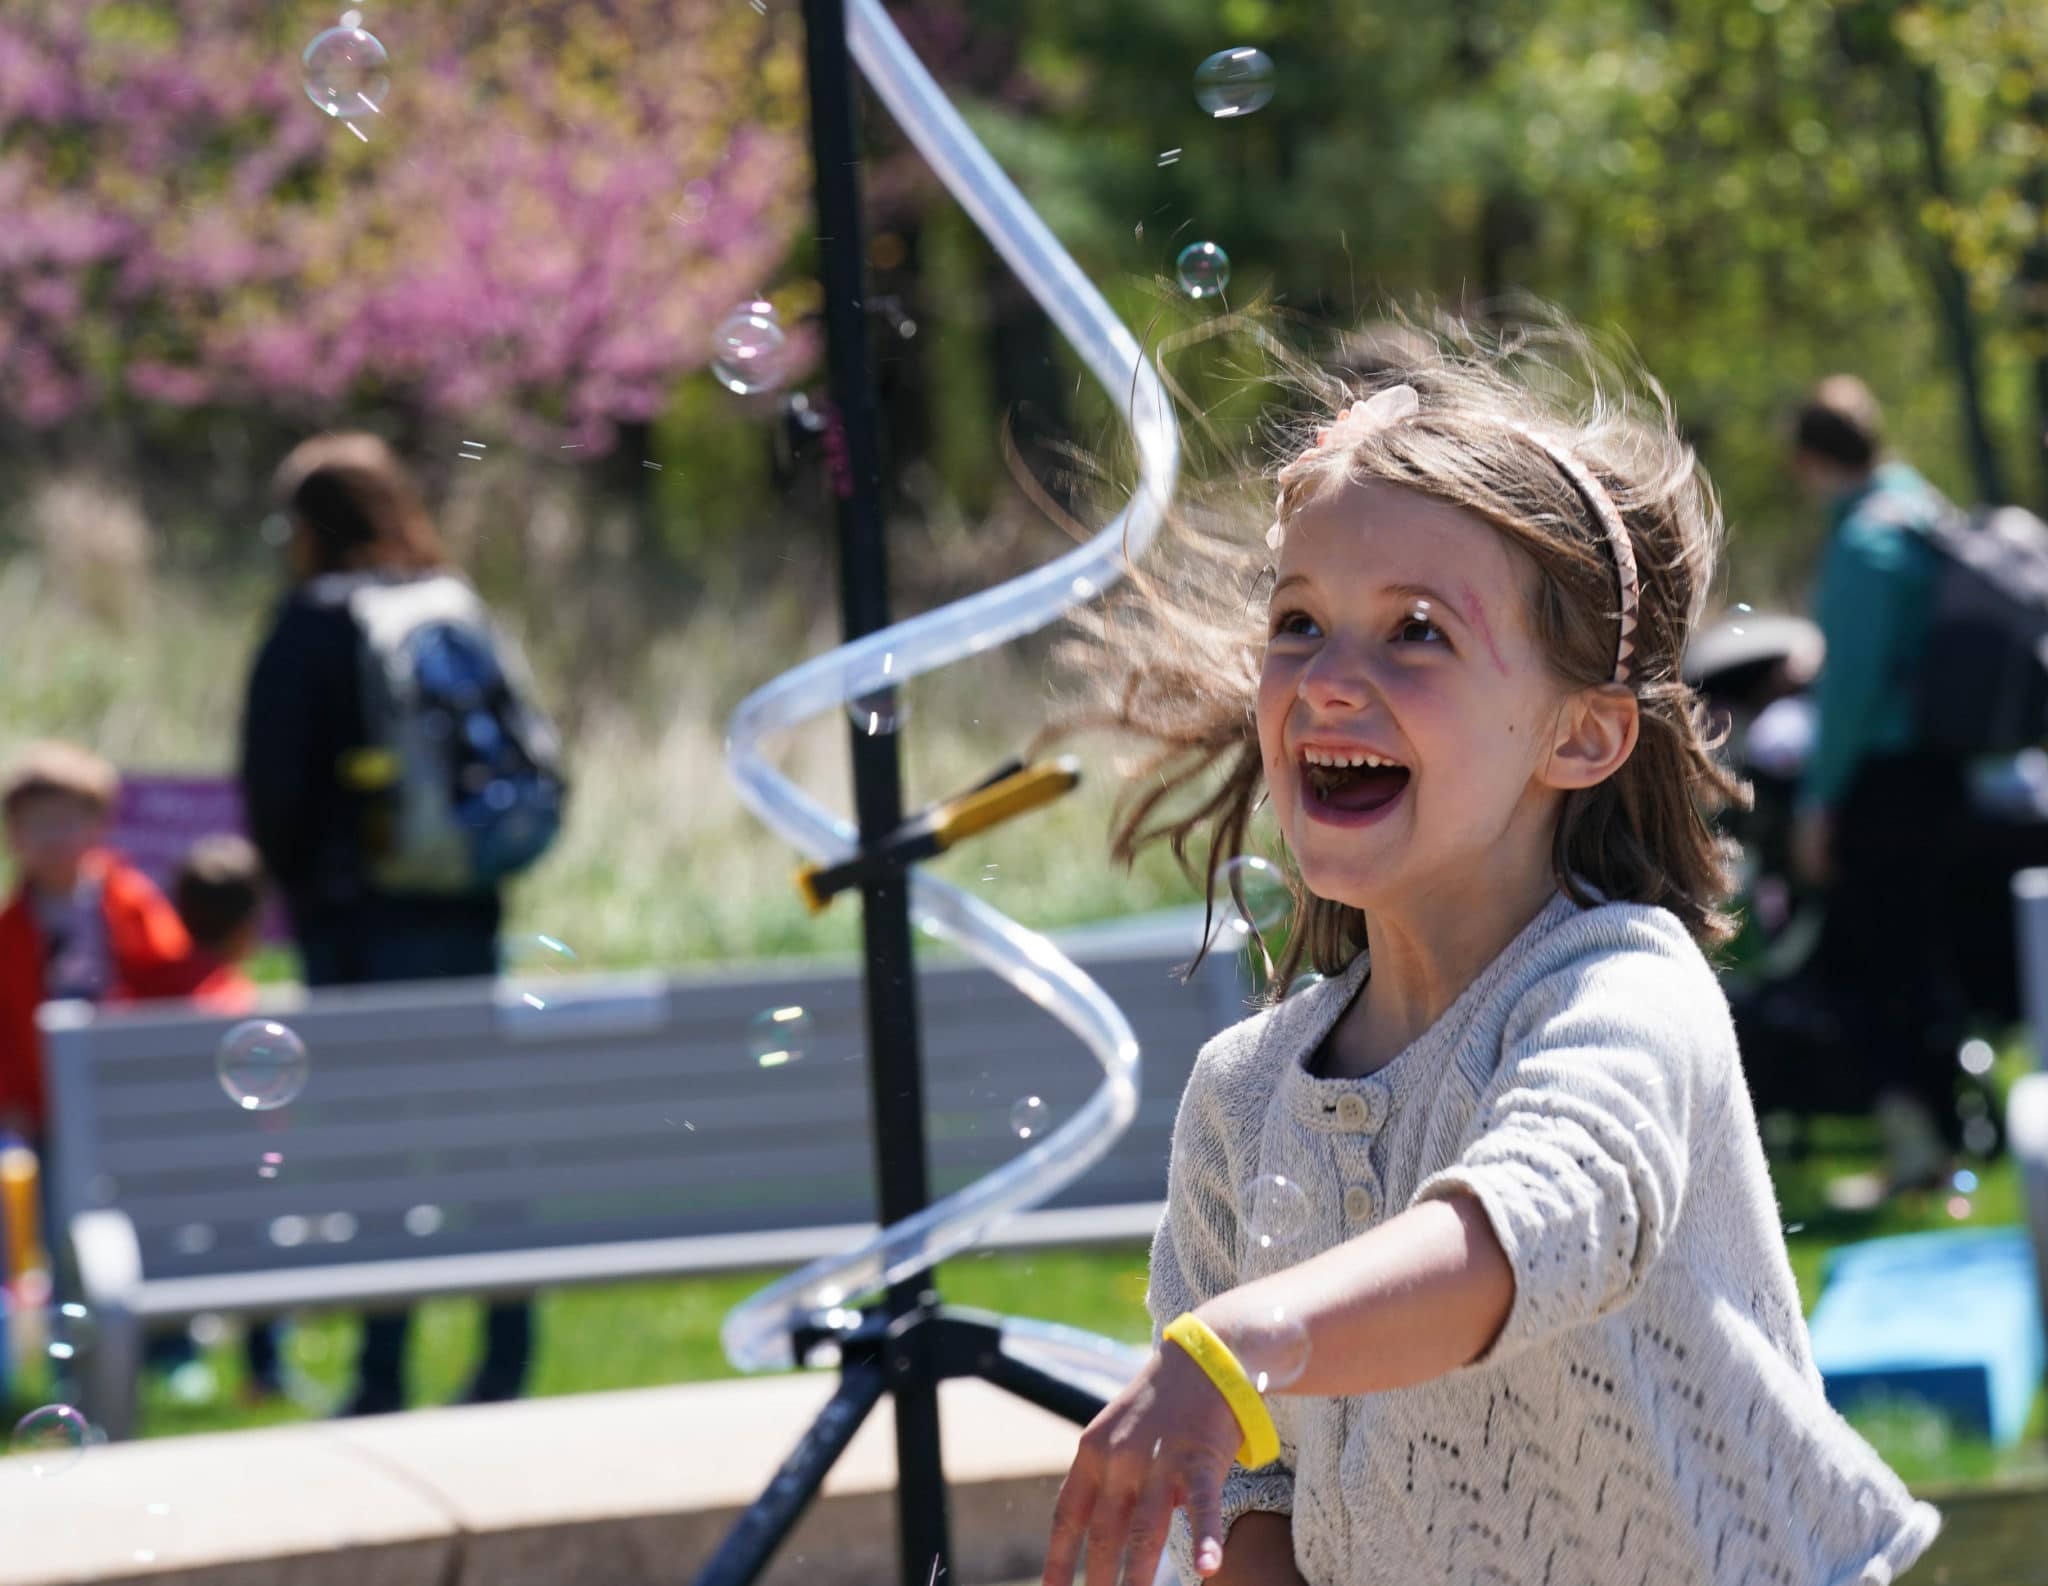 A girl playing with bubbles and smiling